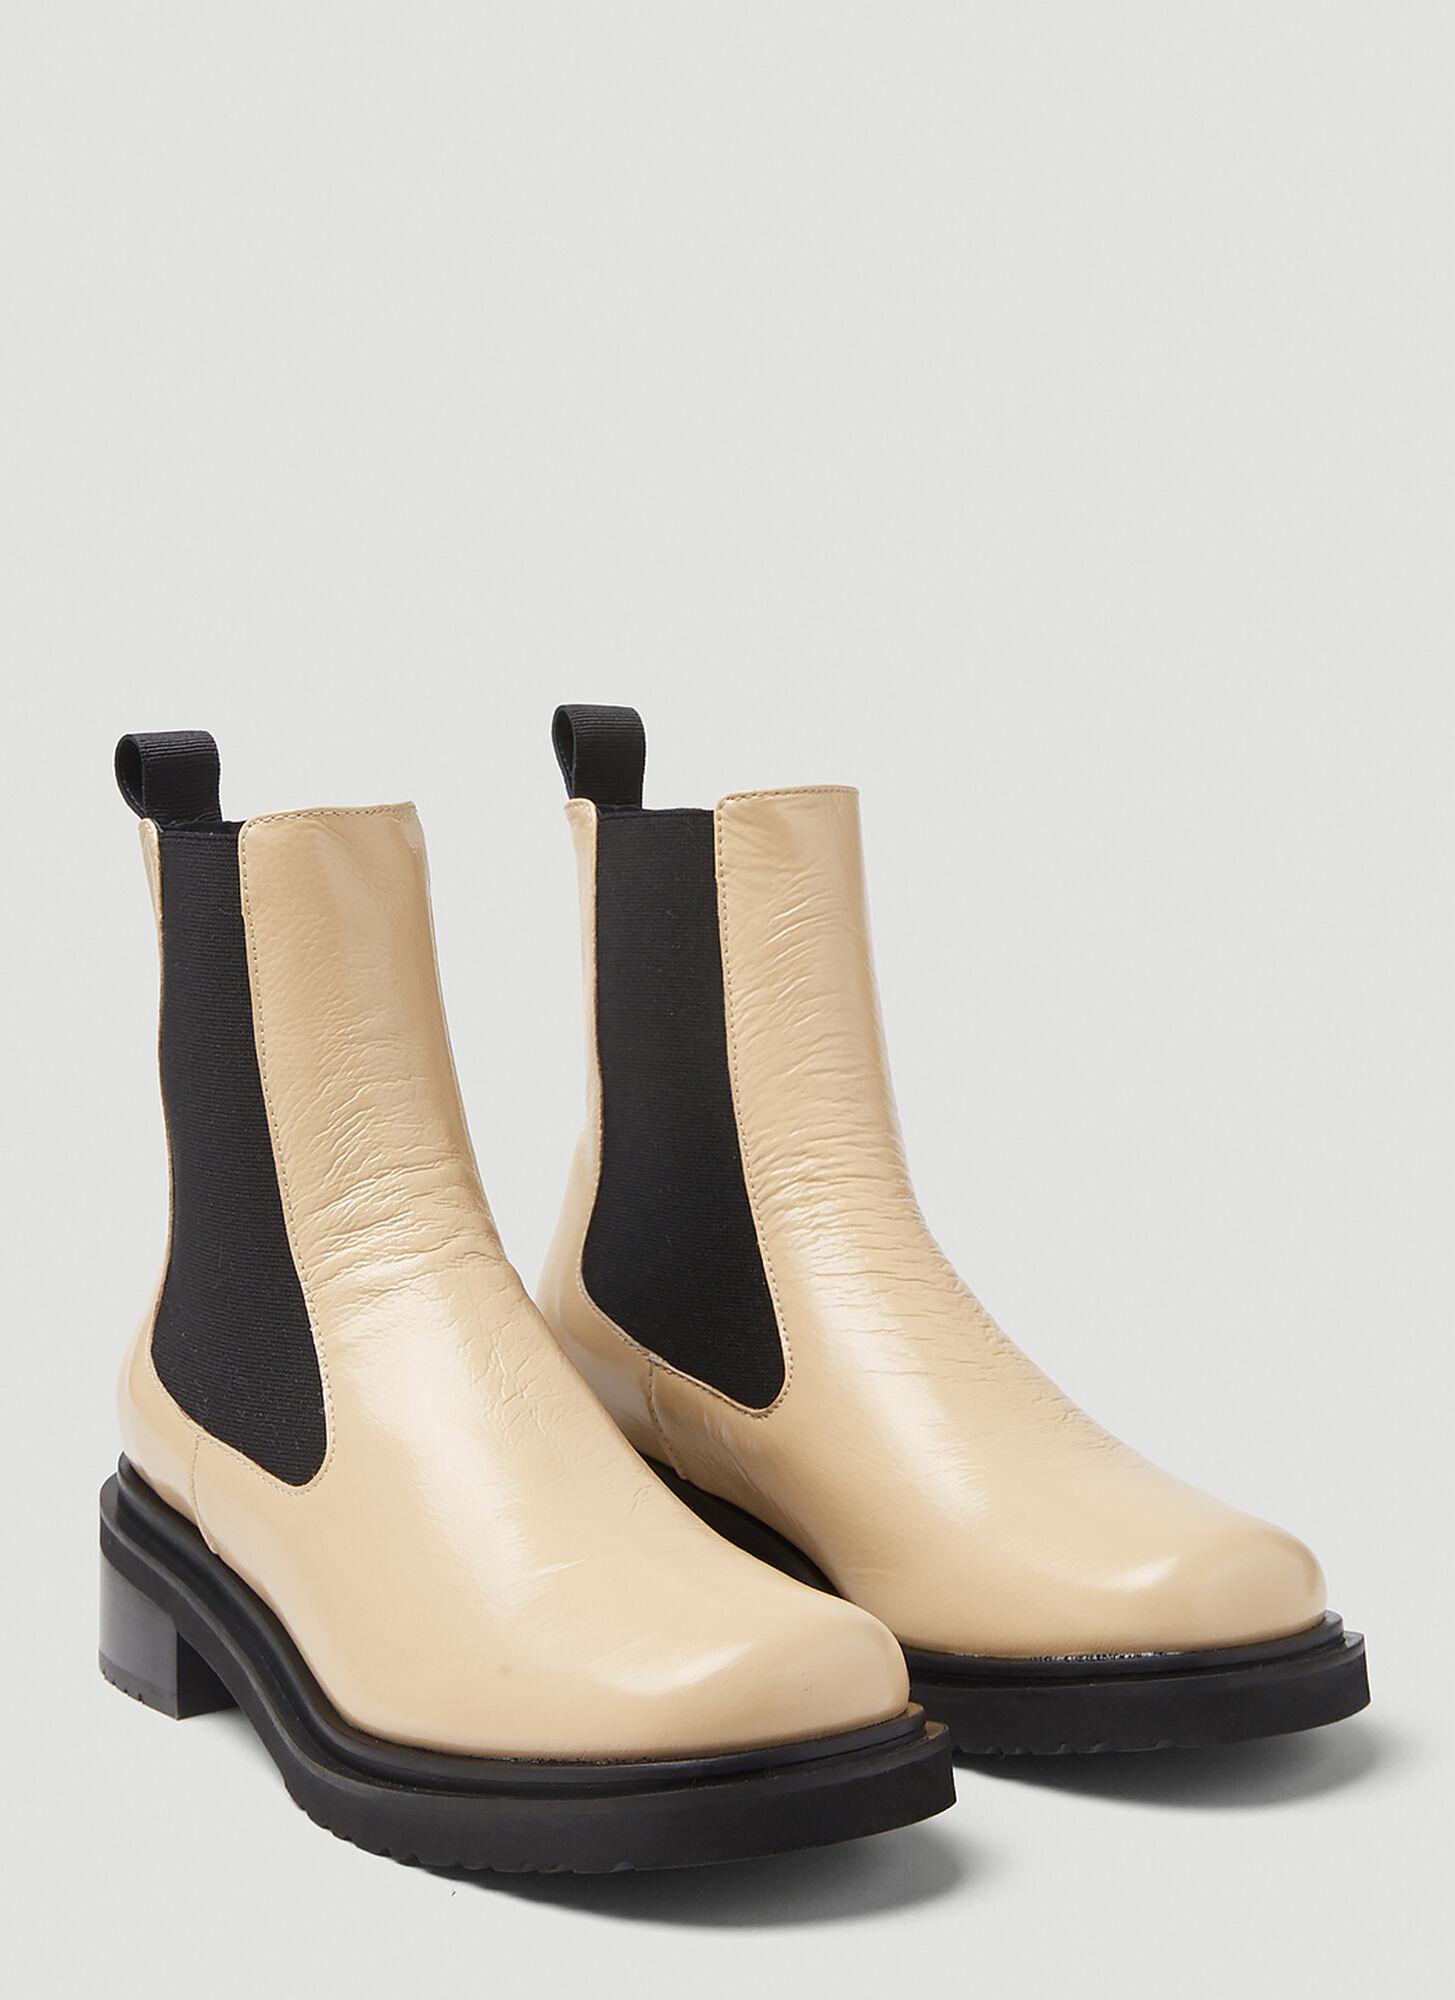 BY FAR Leather Rika Chelsea Boots in Beige (Natural) | Lyst